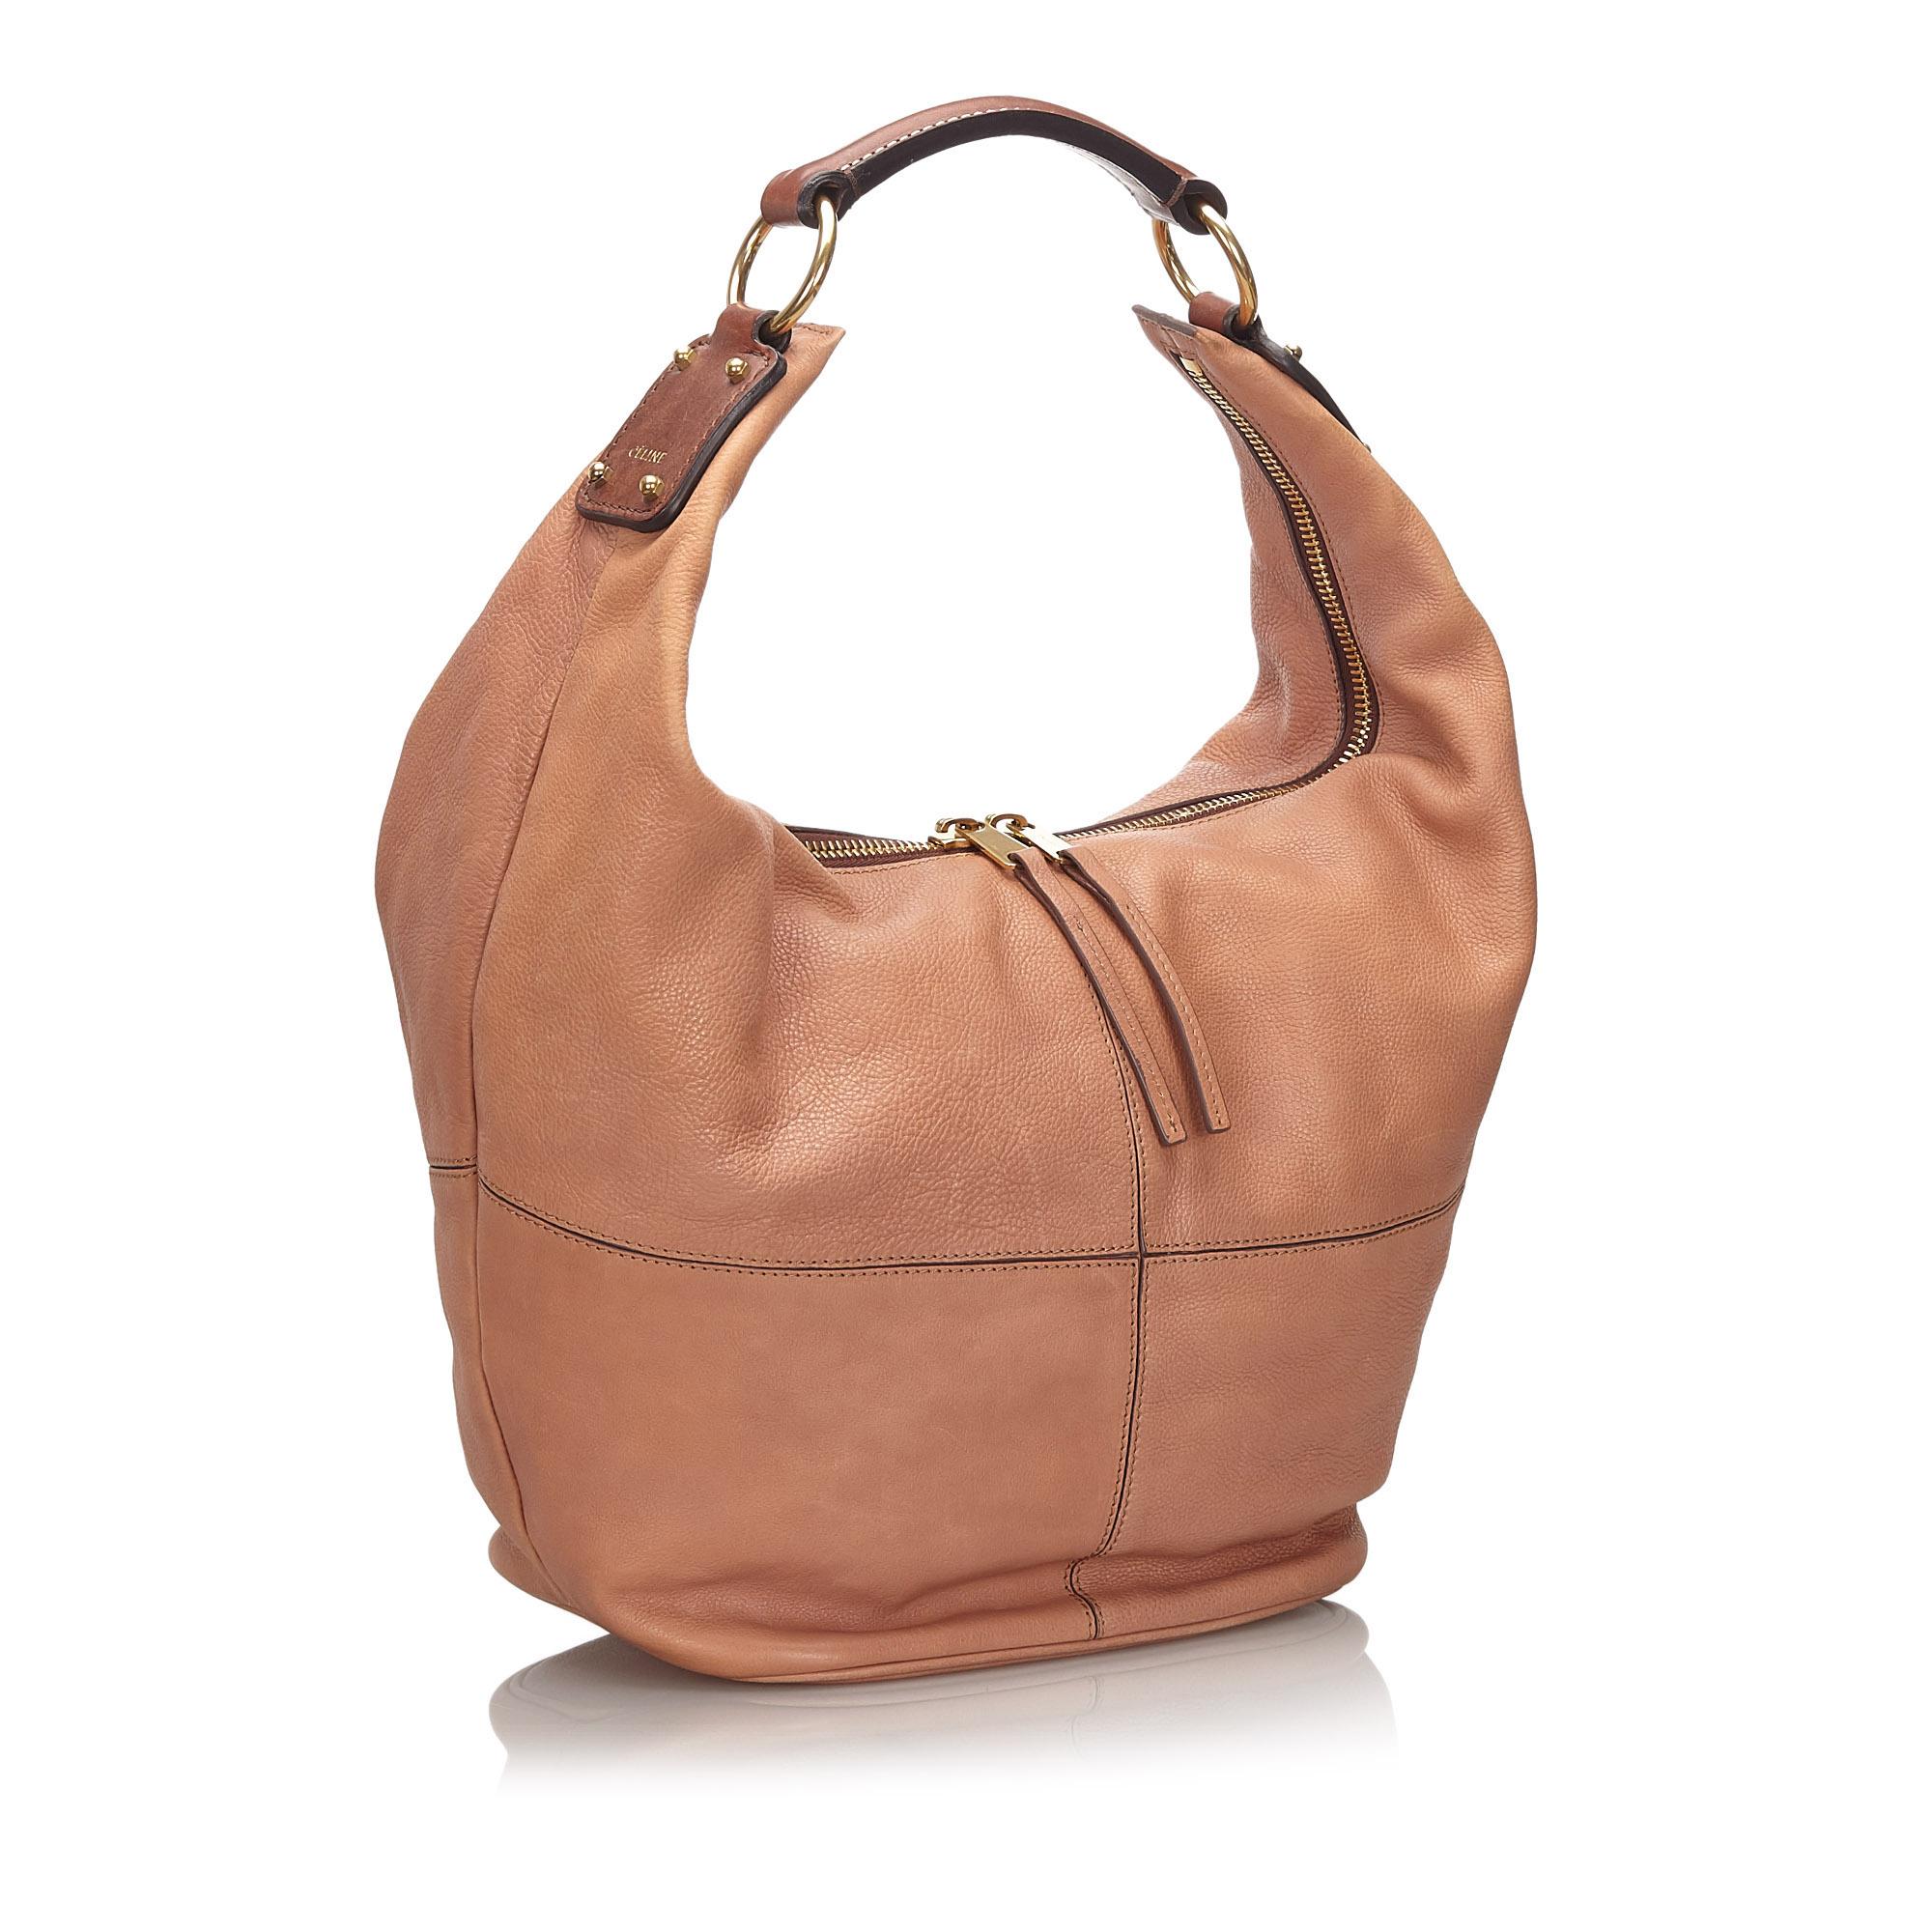 This shoulder bag features a leather body, a flat leather strap, a top zip closure, and interior zip and slip pockets. It carries as B+ condition rating.

Inclusions: 
Dust Bag
Dimensions:
Length: 30.00 cm
Width: 40.00 cm
Depth: 16.00 cm
Shoulder